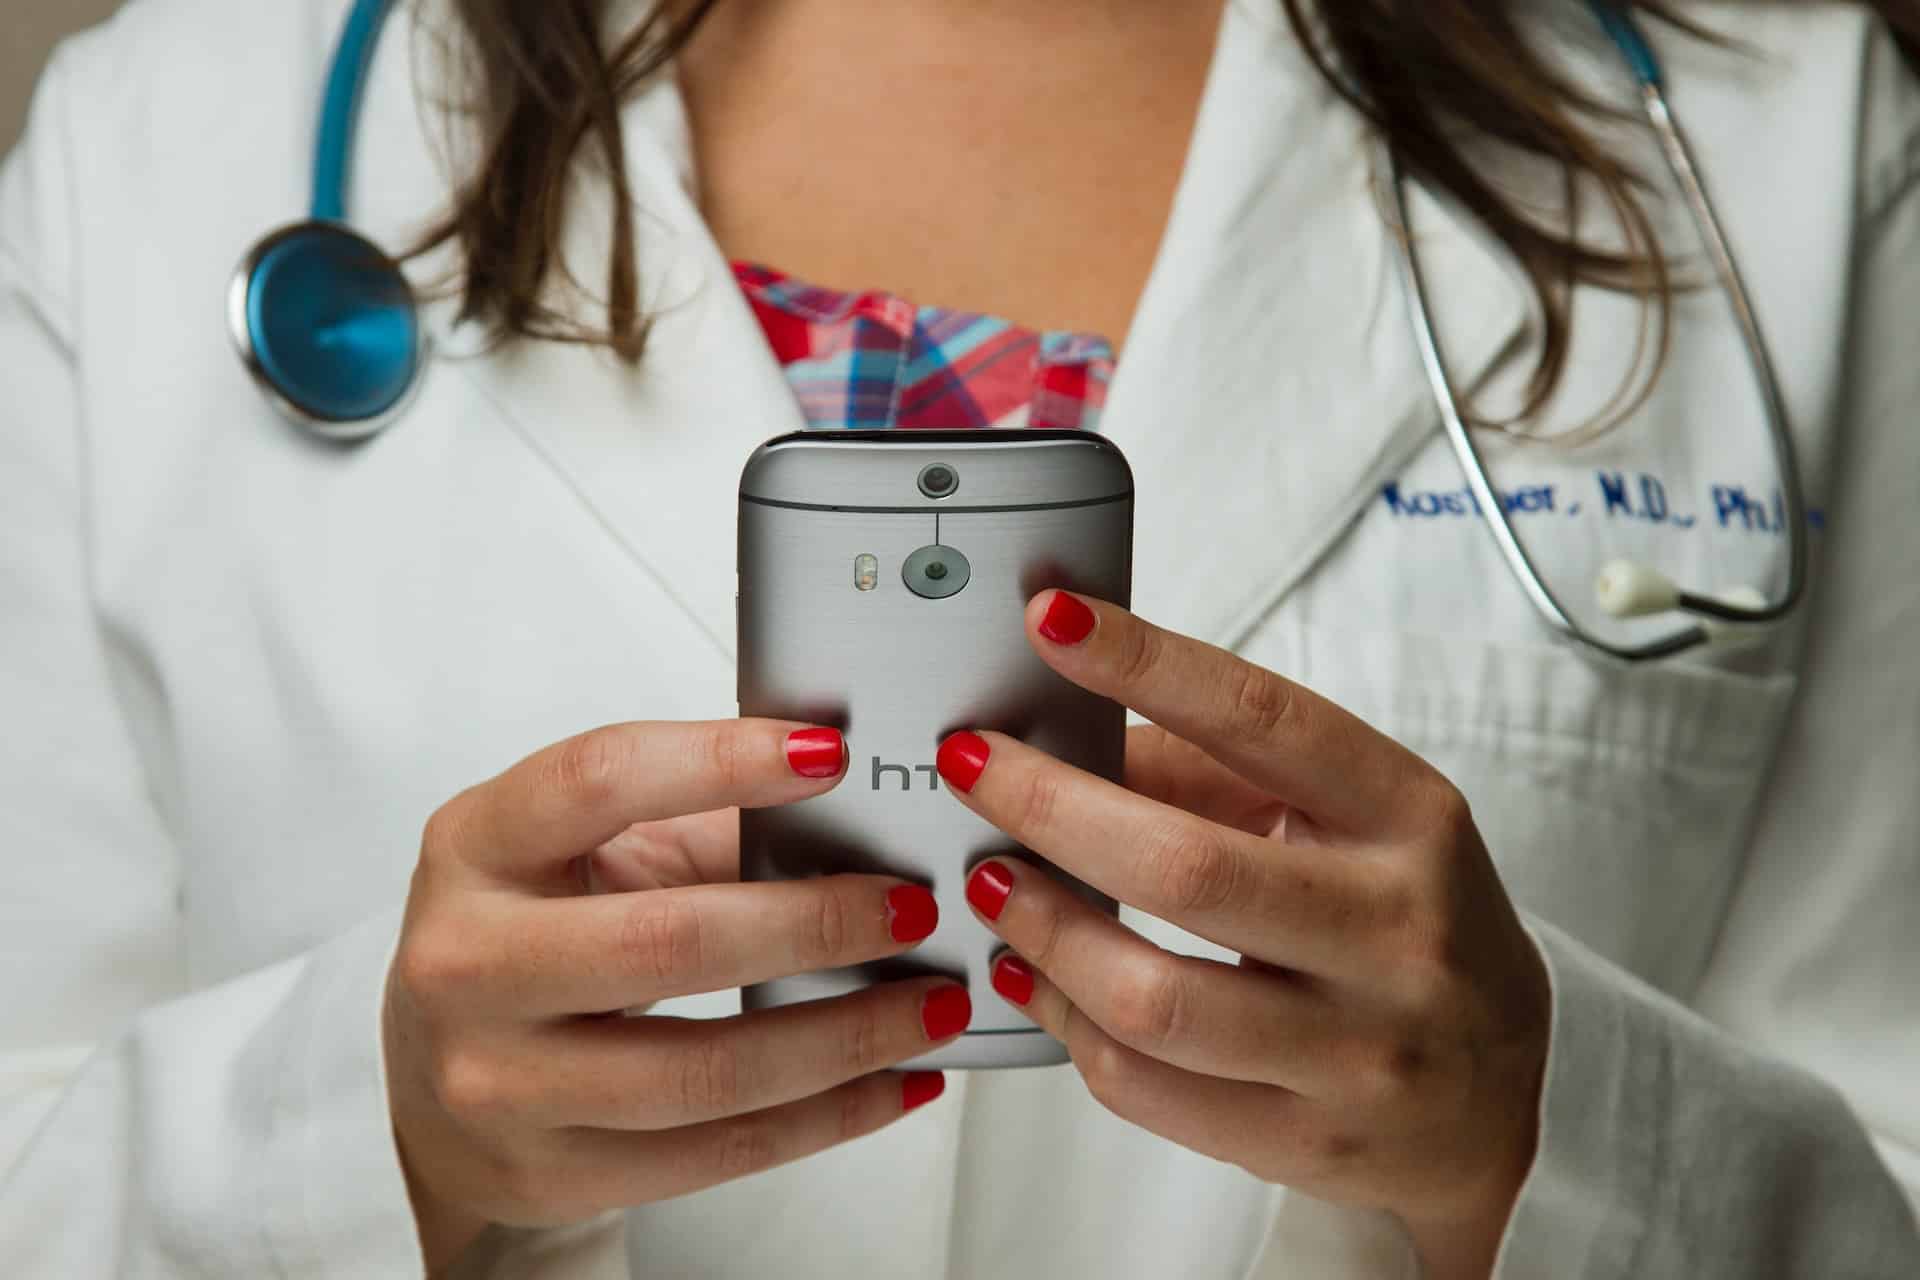 Female doctor with red painted nails holding a phone and enjoying modernized application